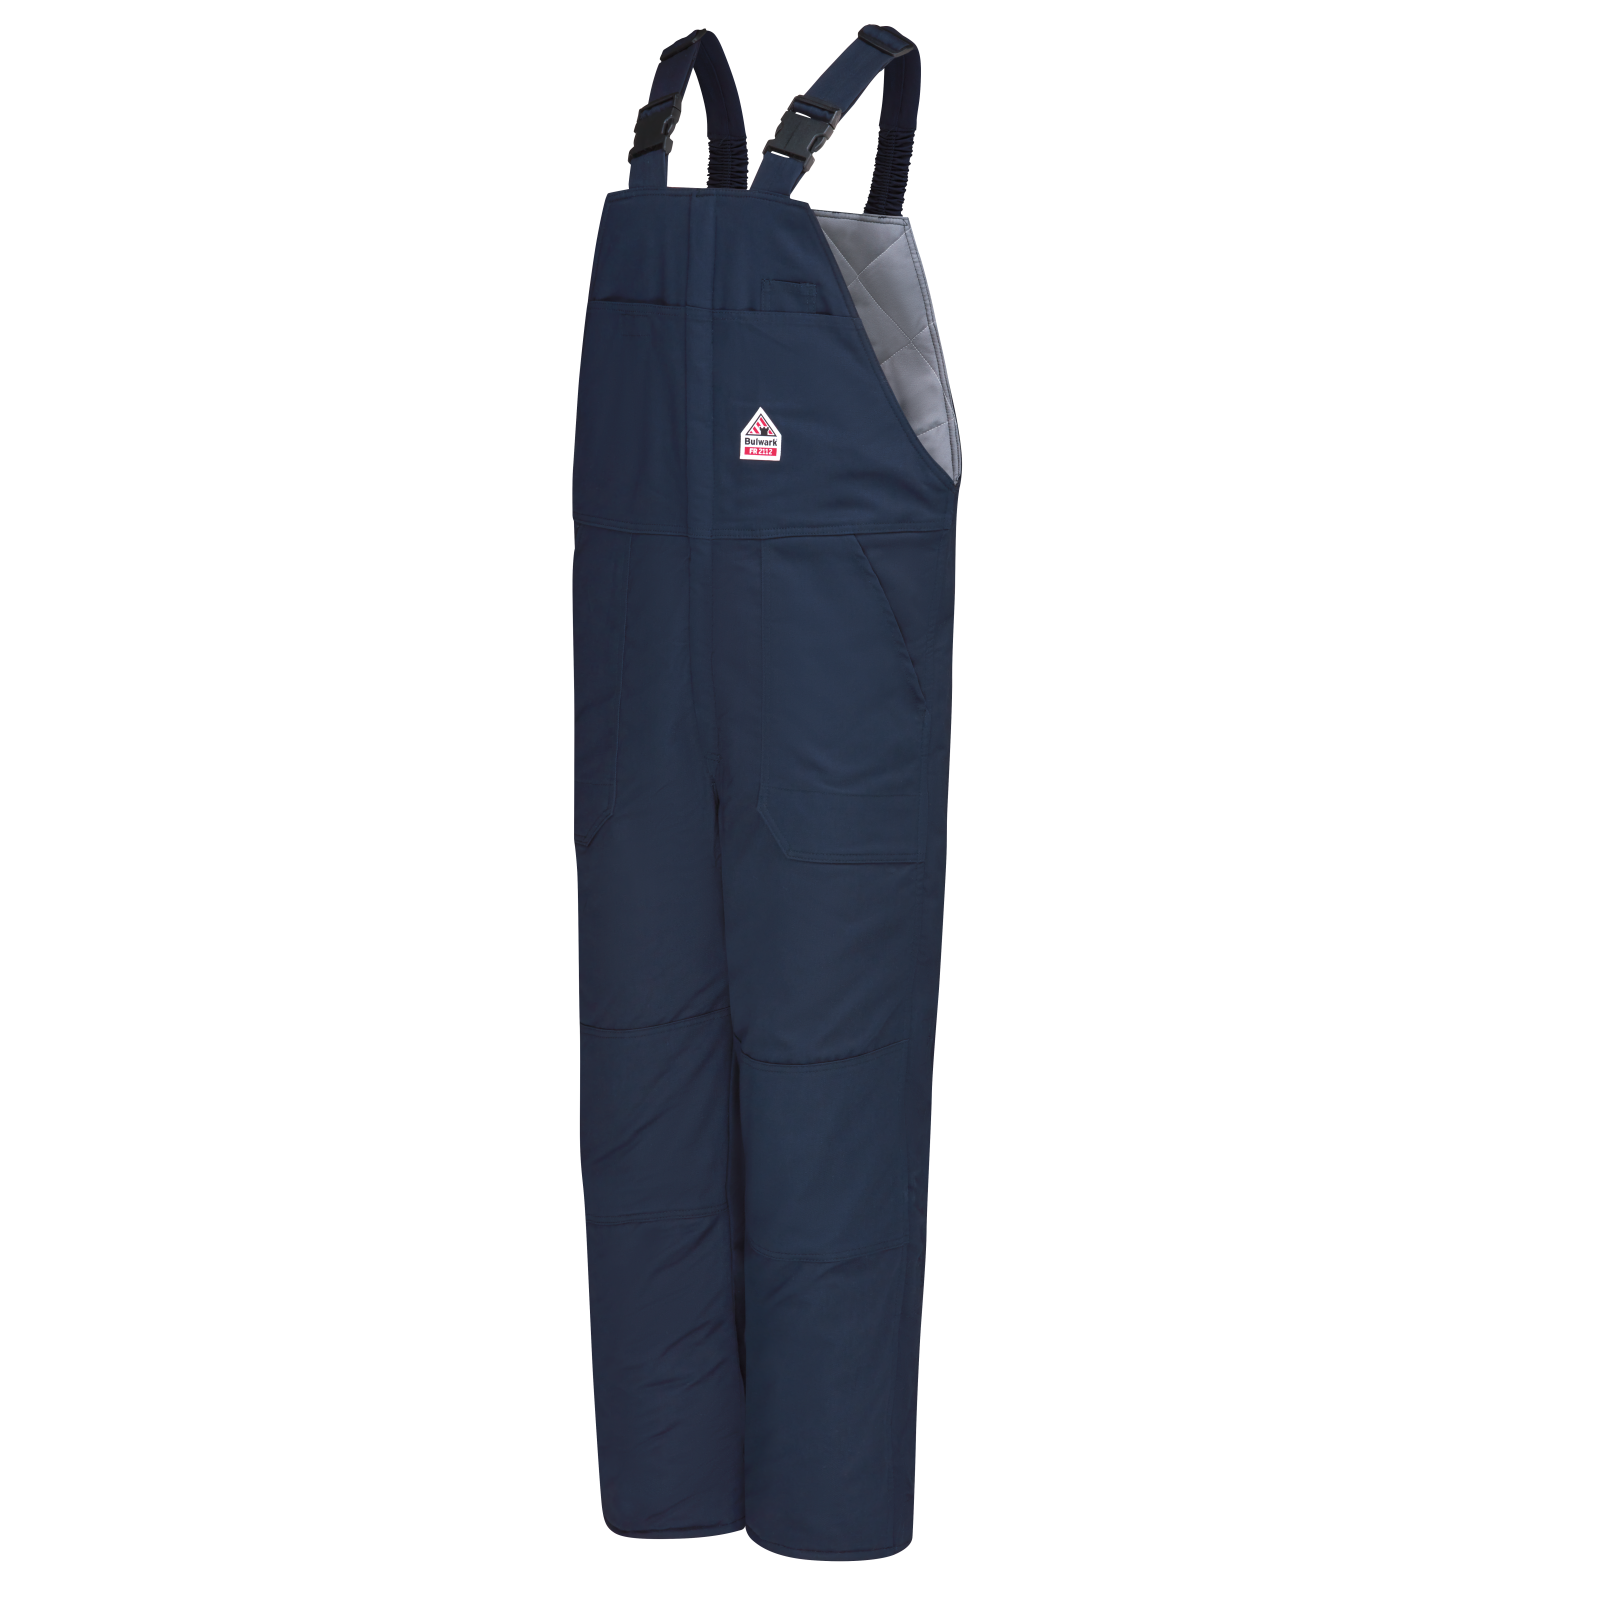 Men's Midweight Excel FR® ComforTouch® Deluxe Insulated Bib Overall